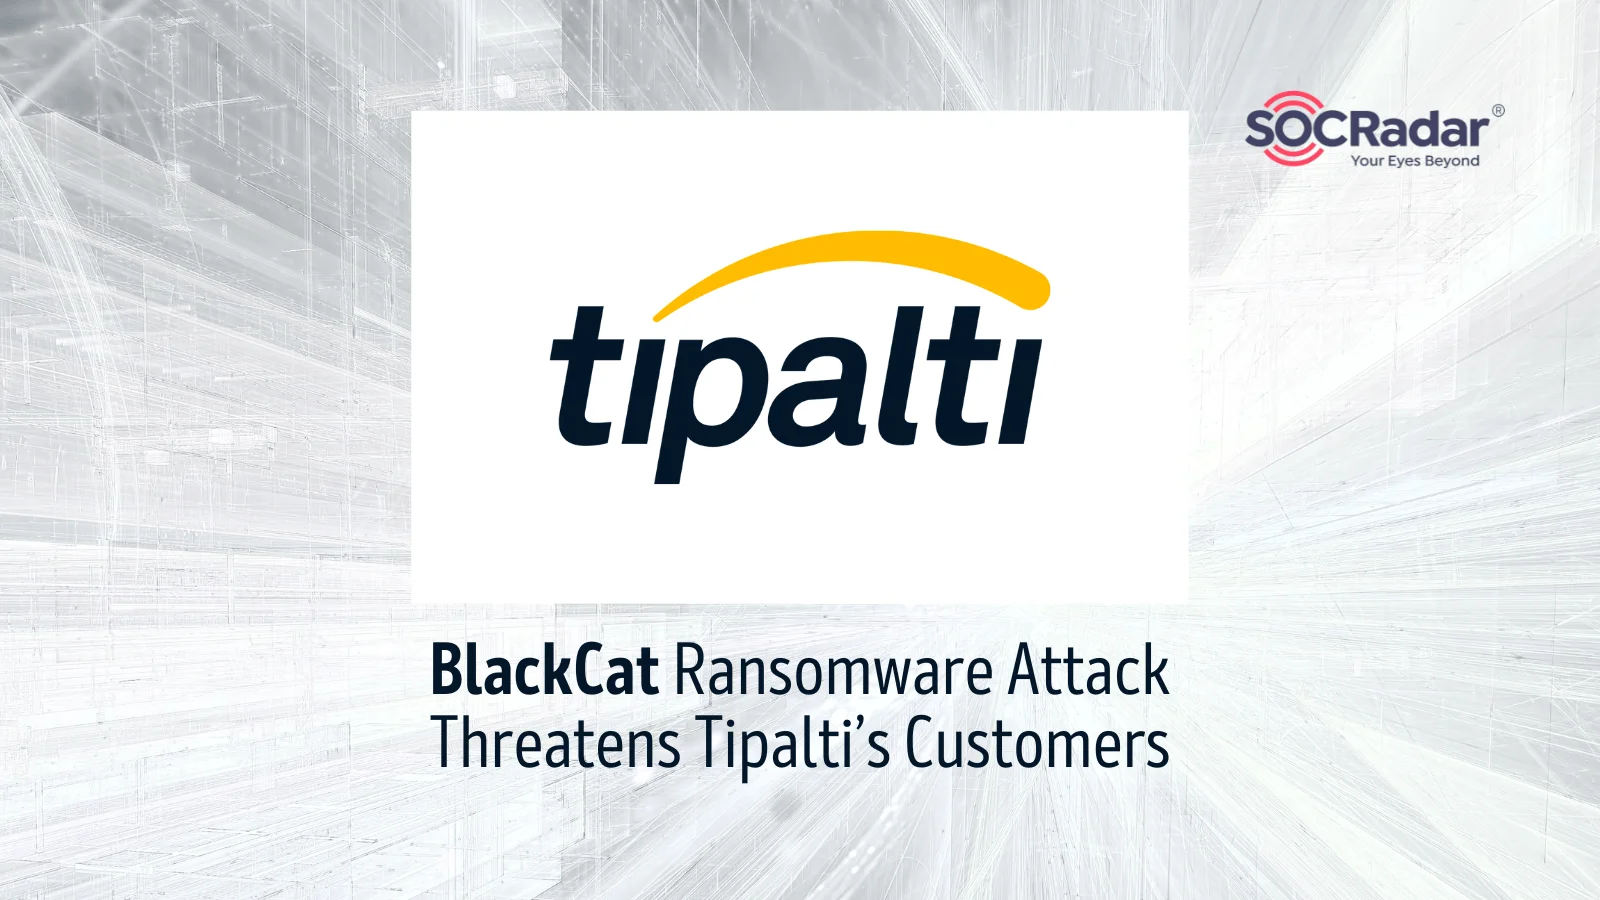 Tipalti Targeted in ALPHV/BlackCat Ransomware Attack: Over 265 GB of Data Compromised